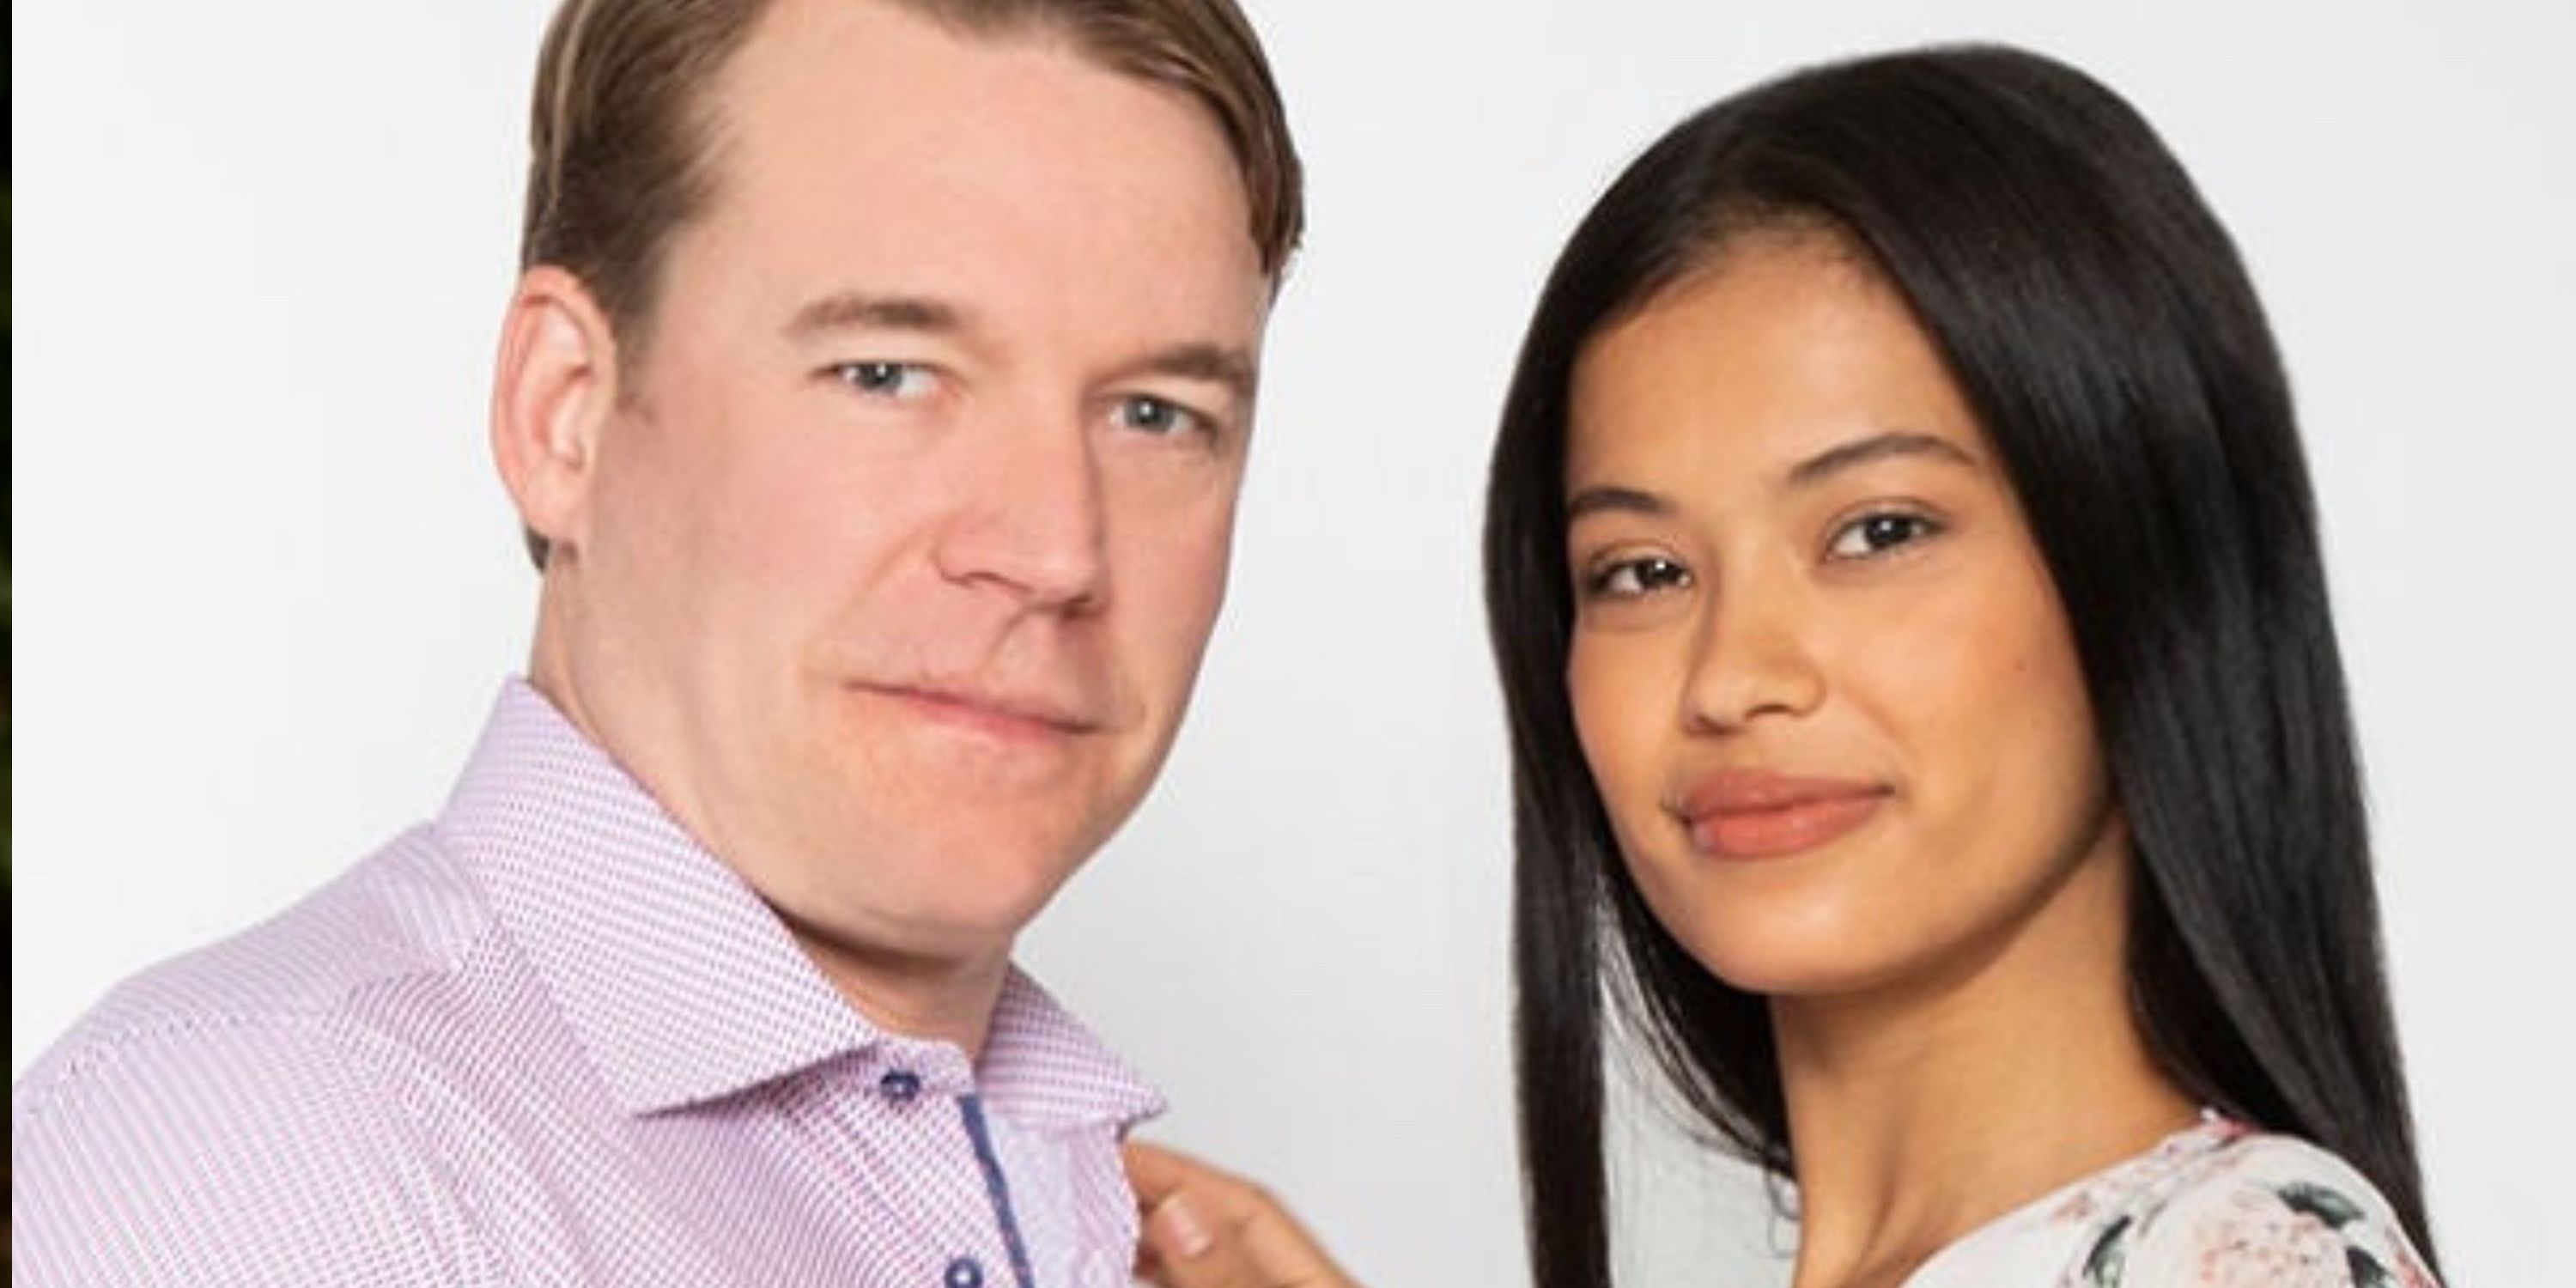 Juliana Custodio with Michael Jessen posed for a photo of the 90 Day Fiancé